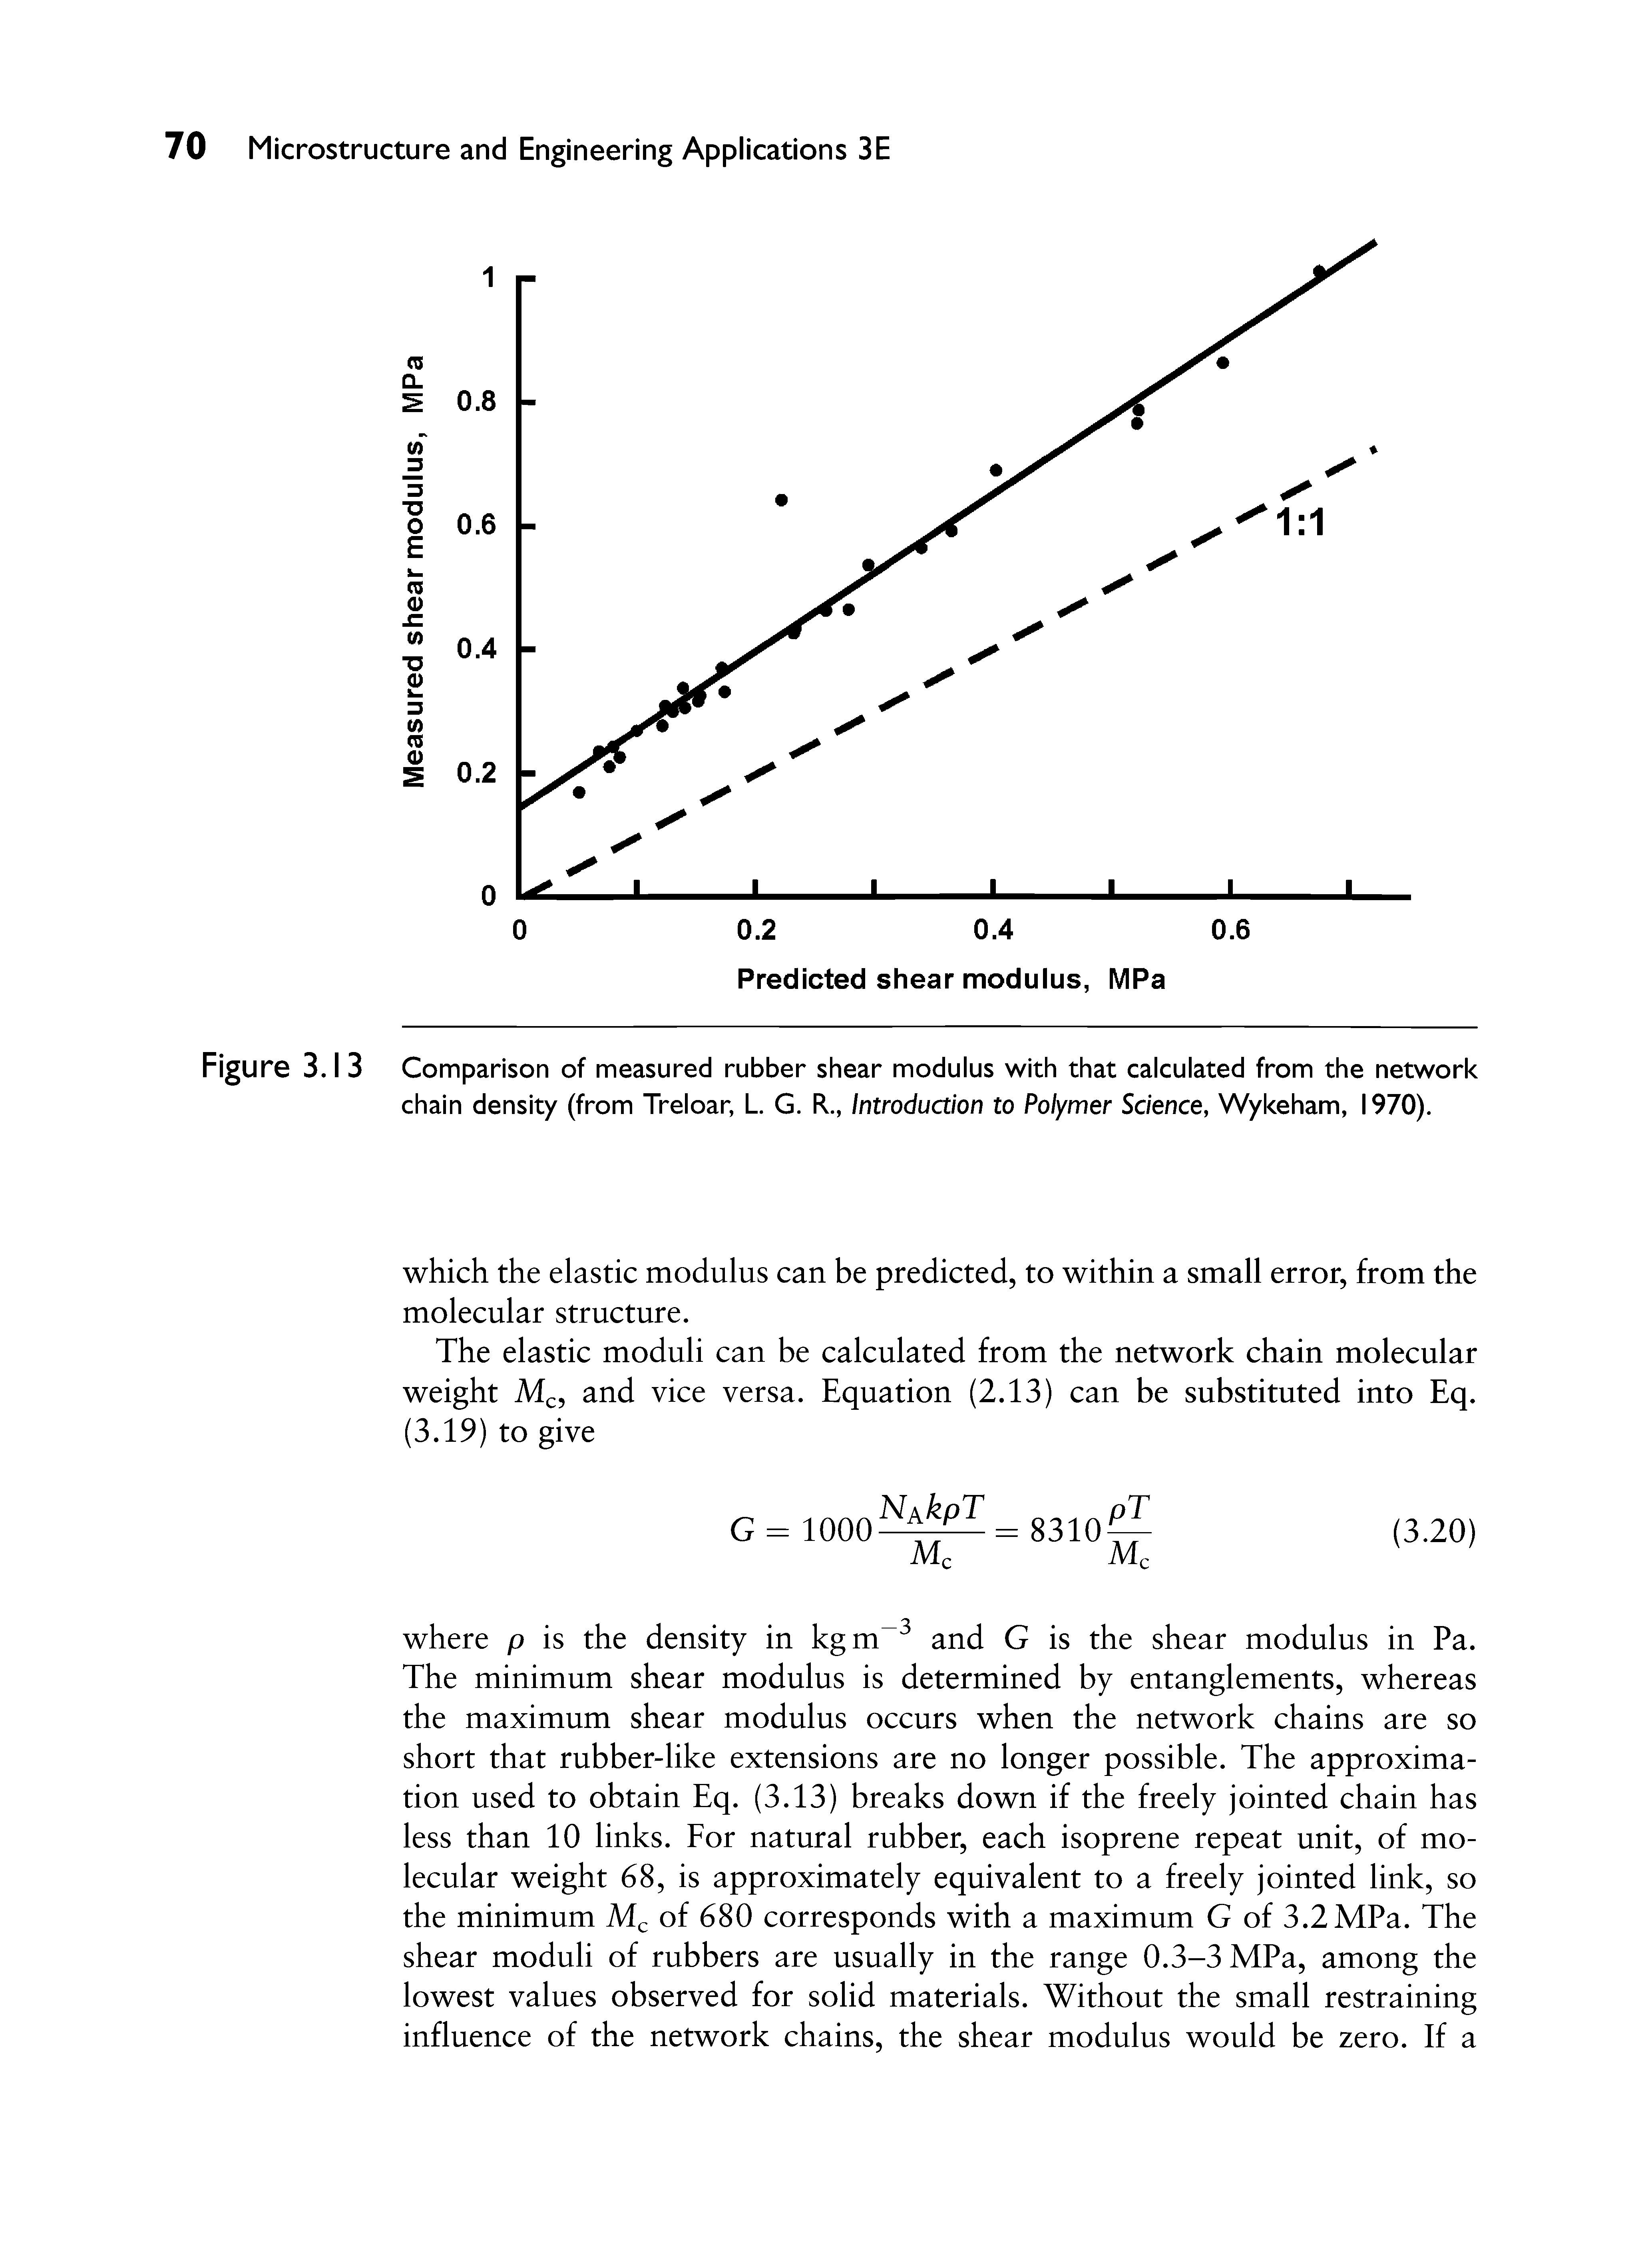 Figure 3.1 3 Comparison of measured rubber shear modulus with that calculated from the network chain density (from Treloar, L. G. R., Introduaion to Polymer Science, Wykeham, 1970).